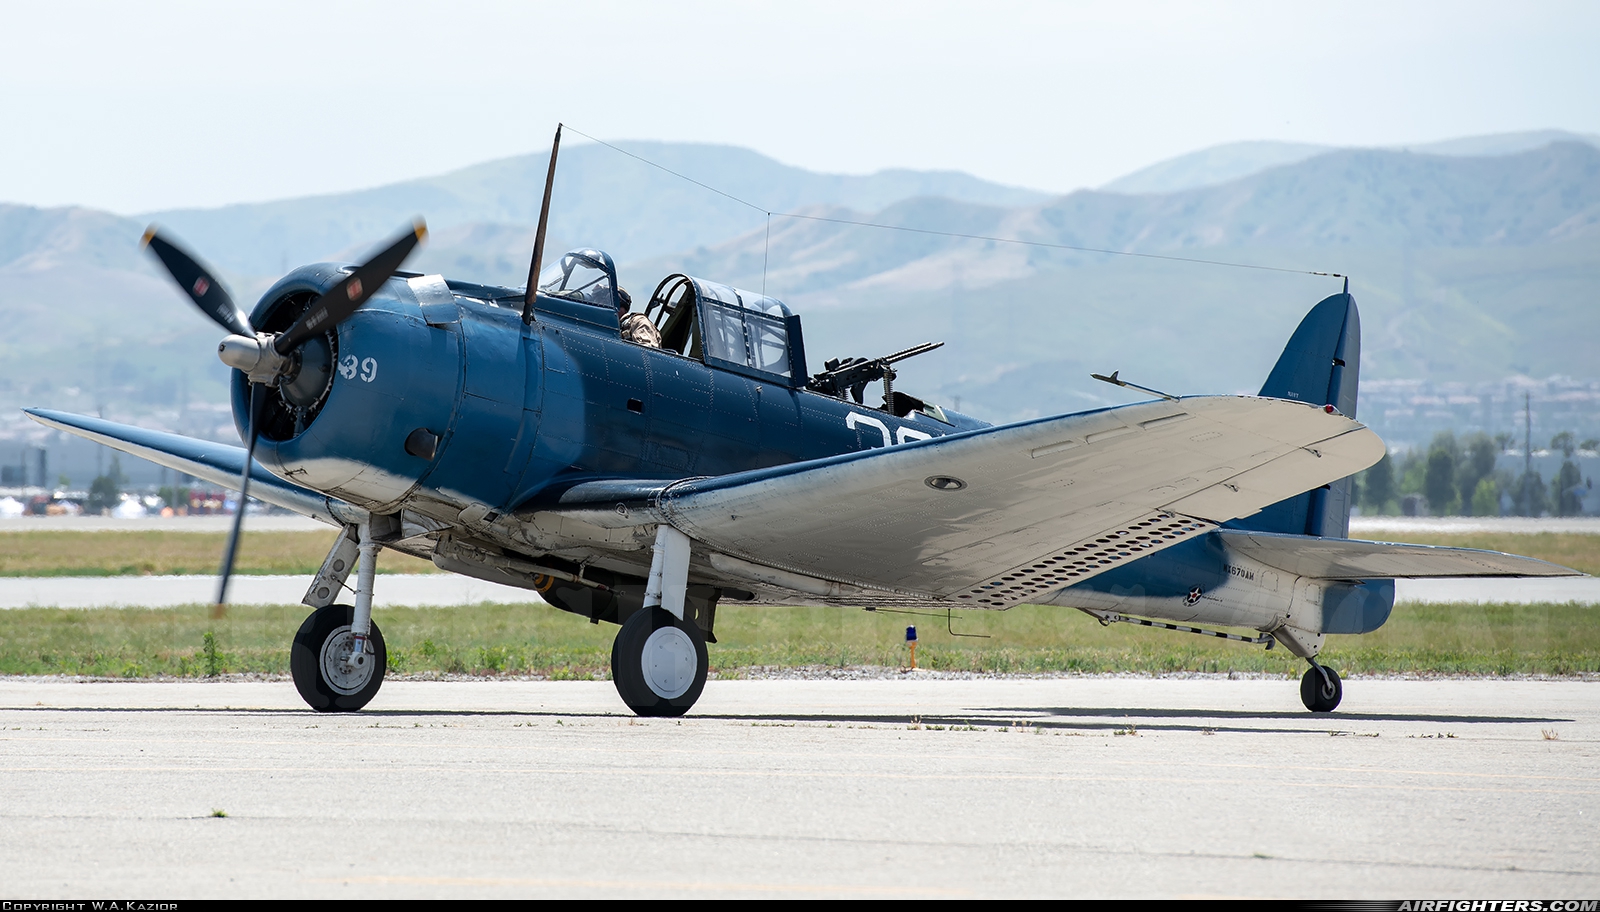 Private - Planes of Fame Air Museum Douglas SBD-5 Dauntless NX670AM at Chino (CNO), USA